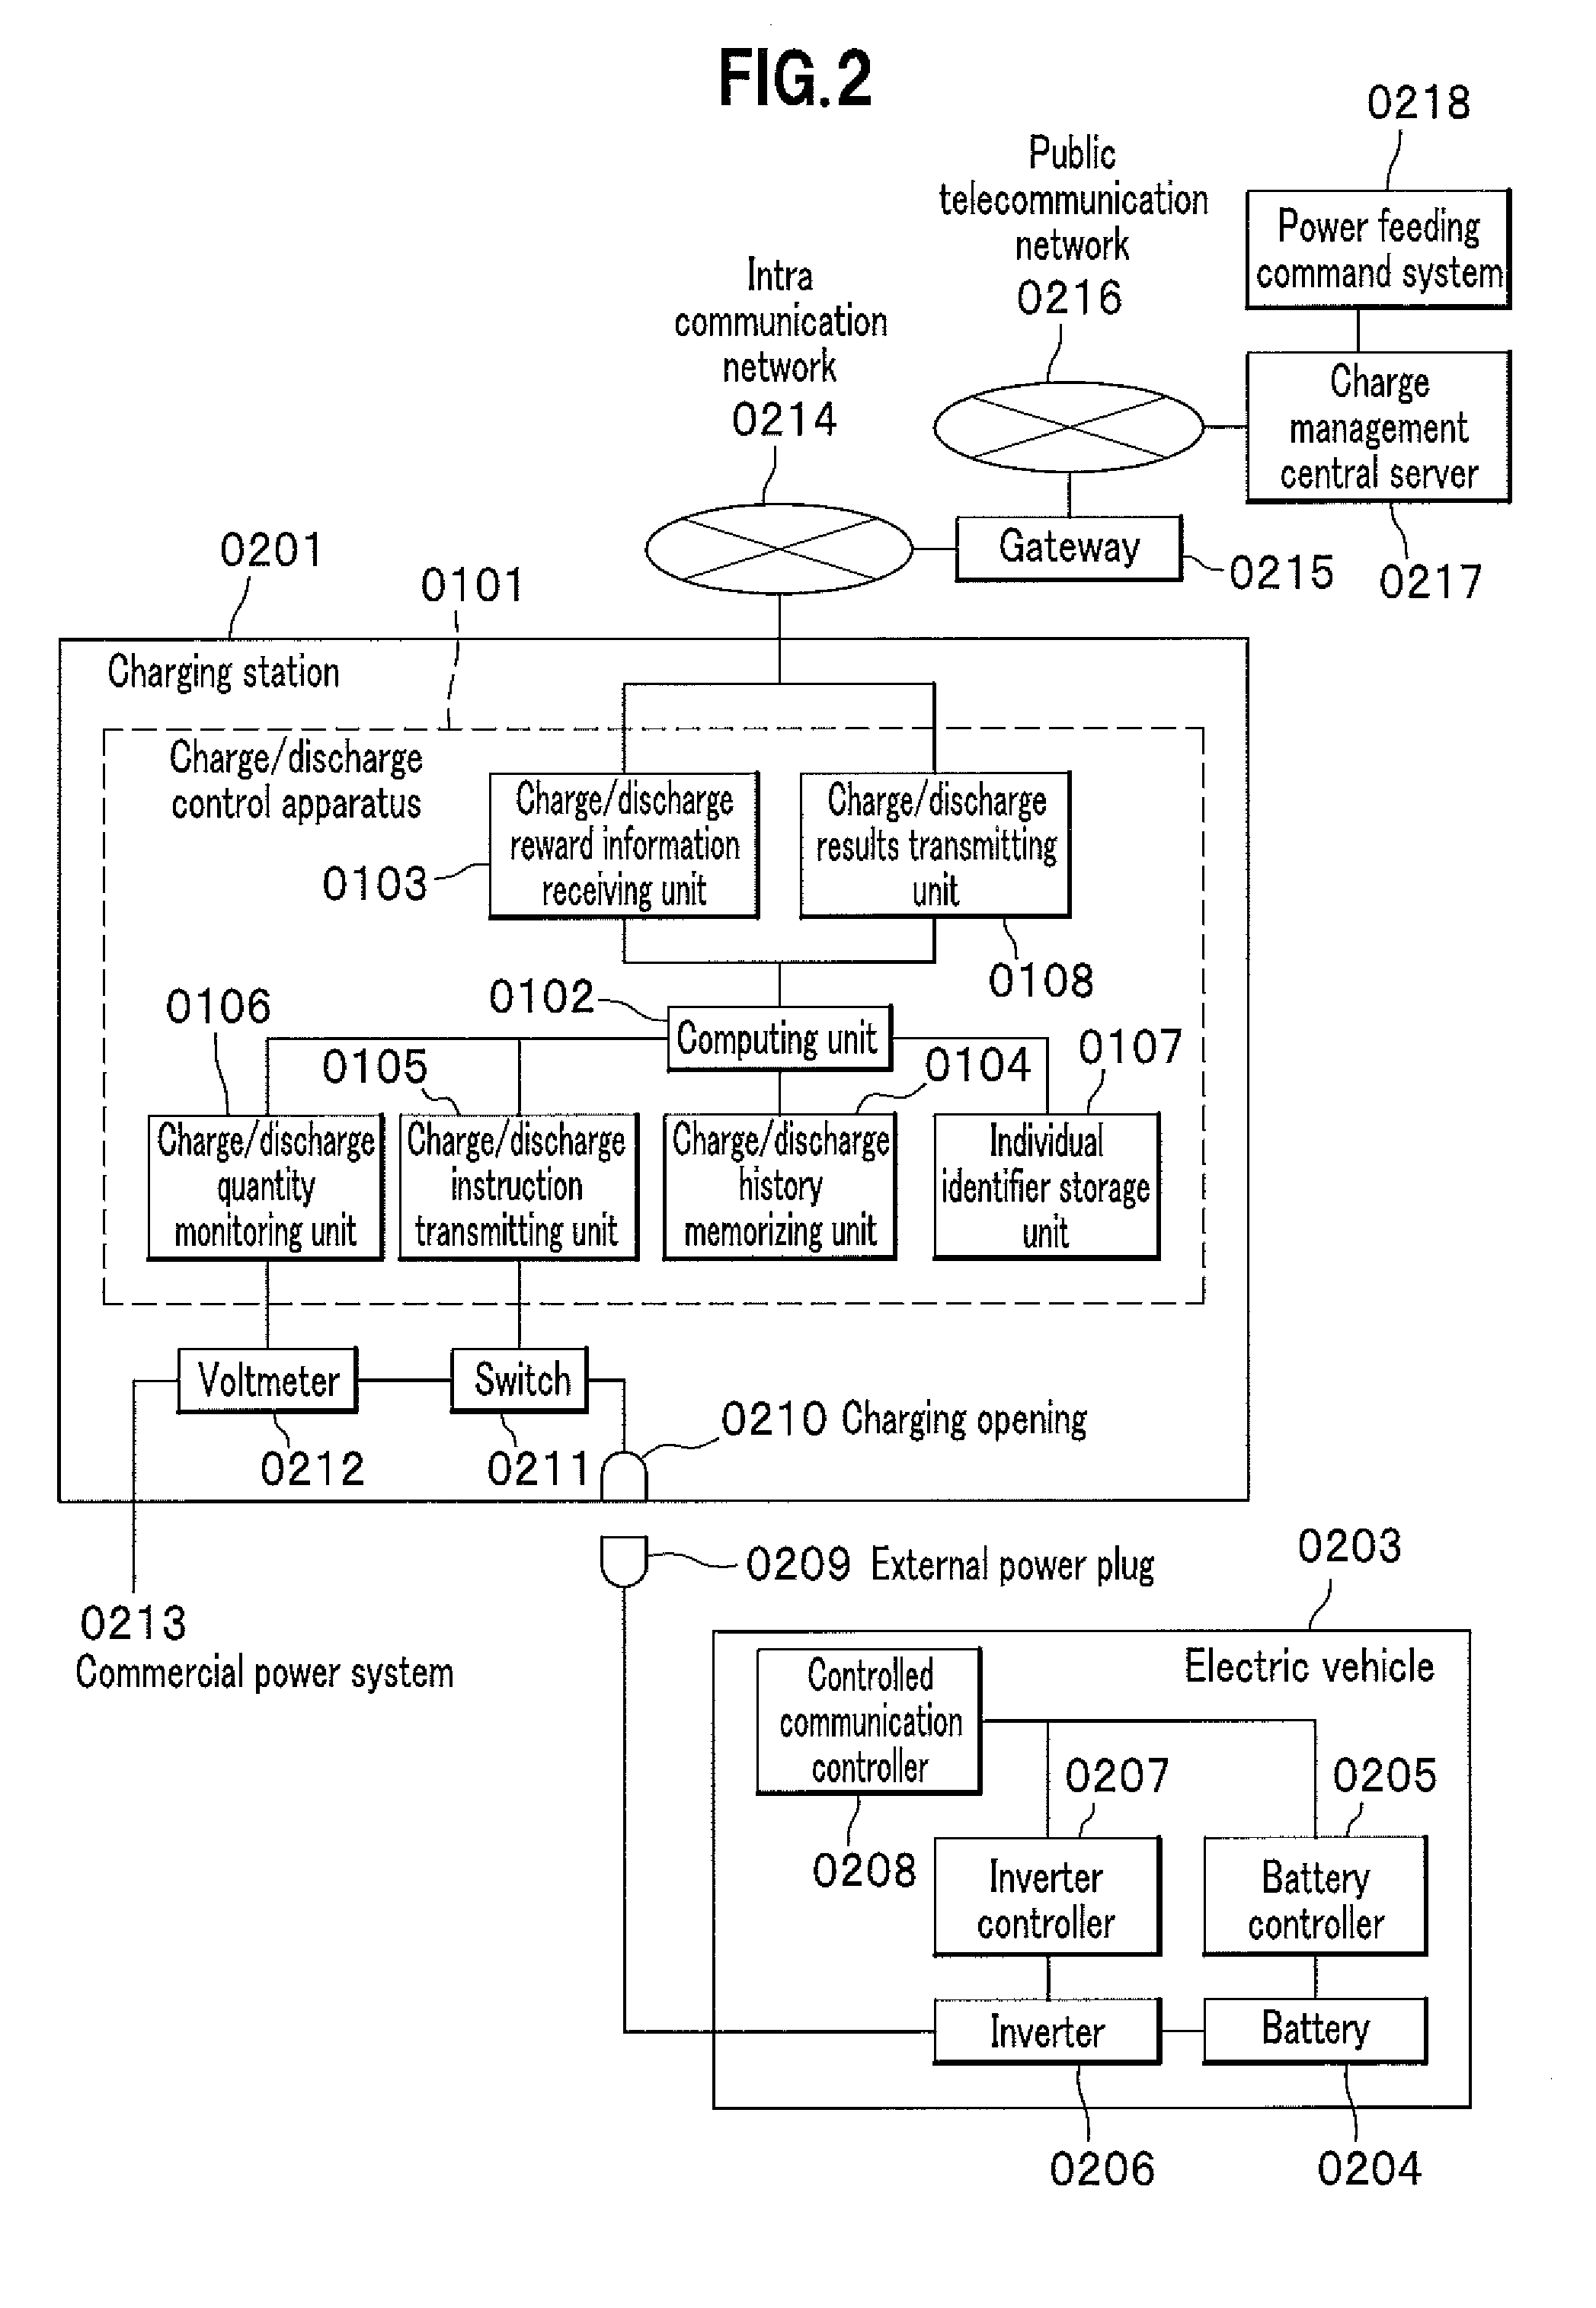 Charge/discharge control apparatus